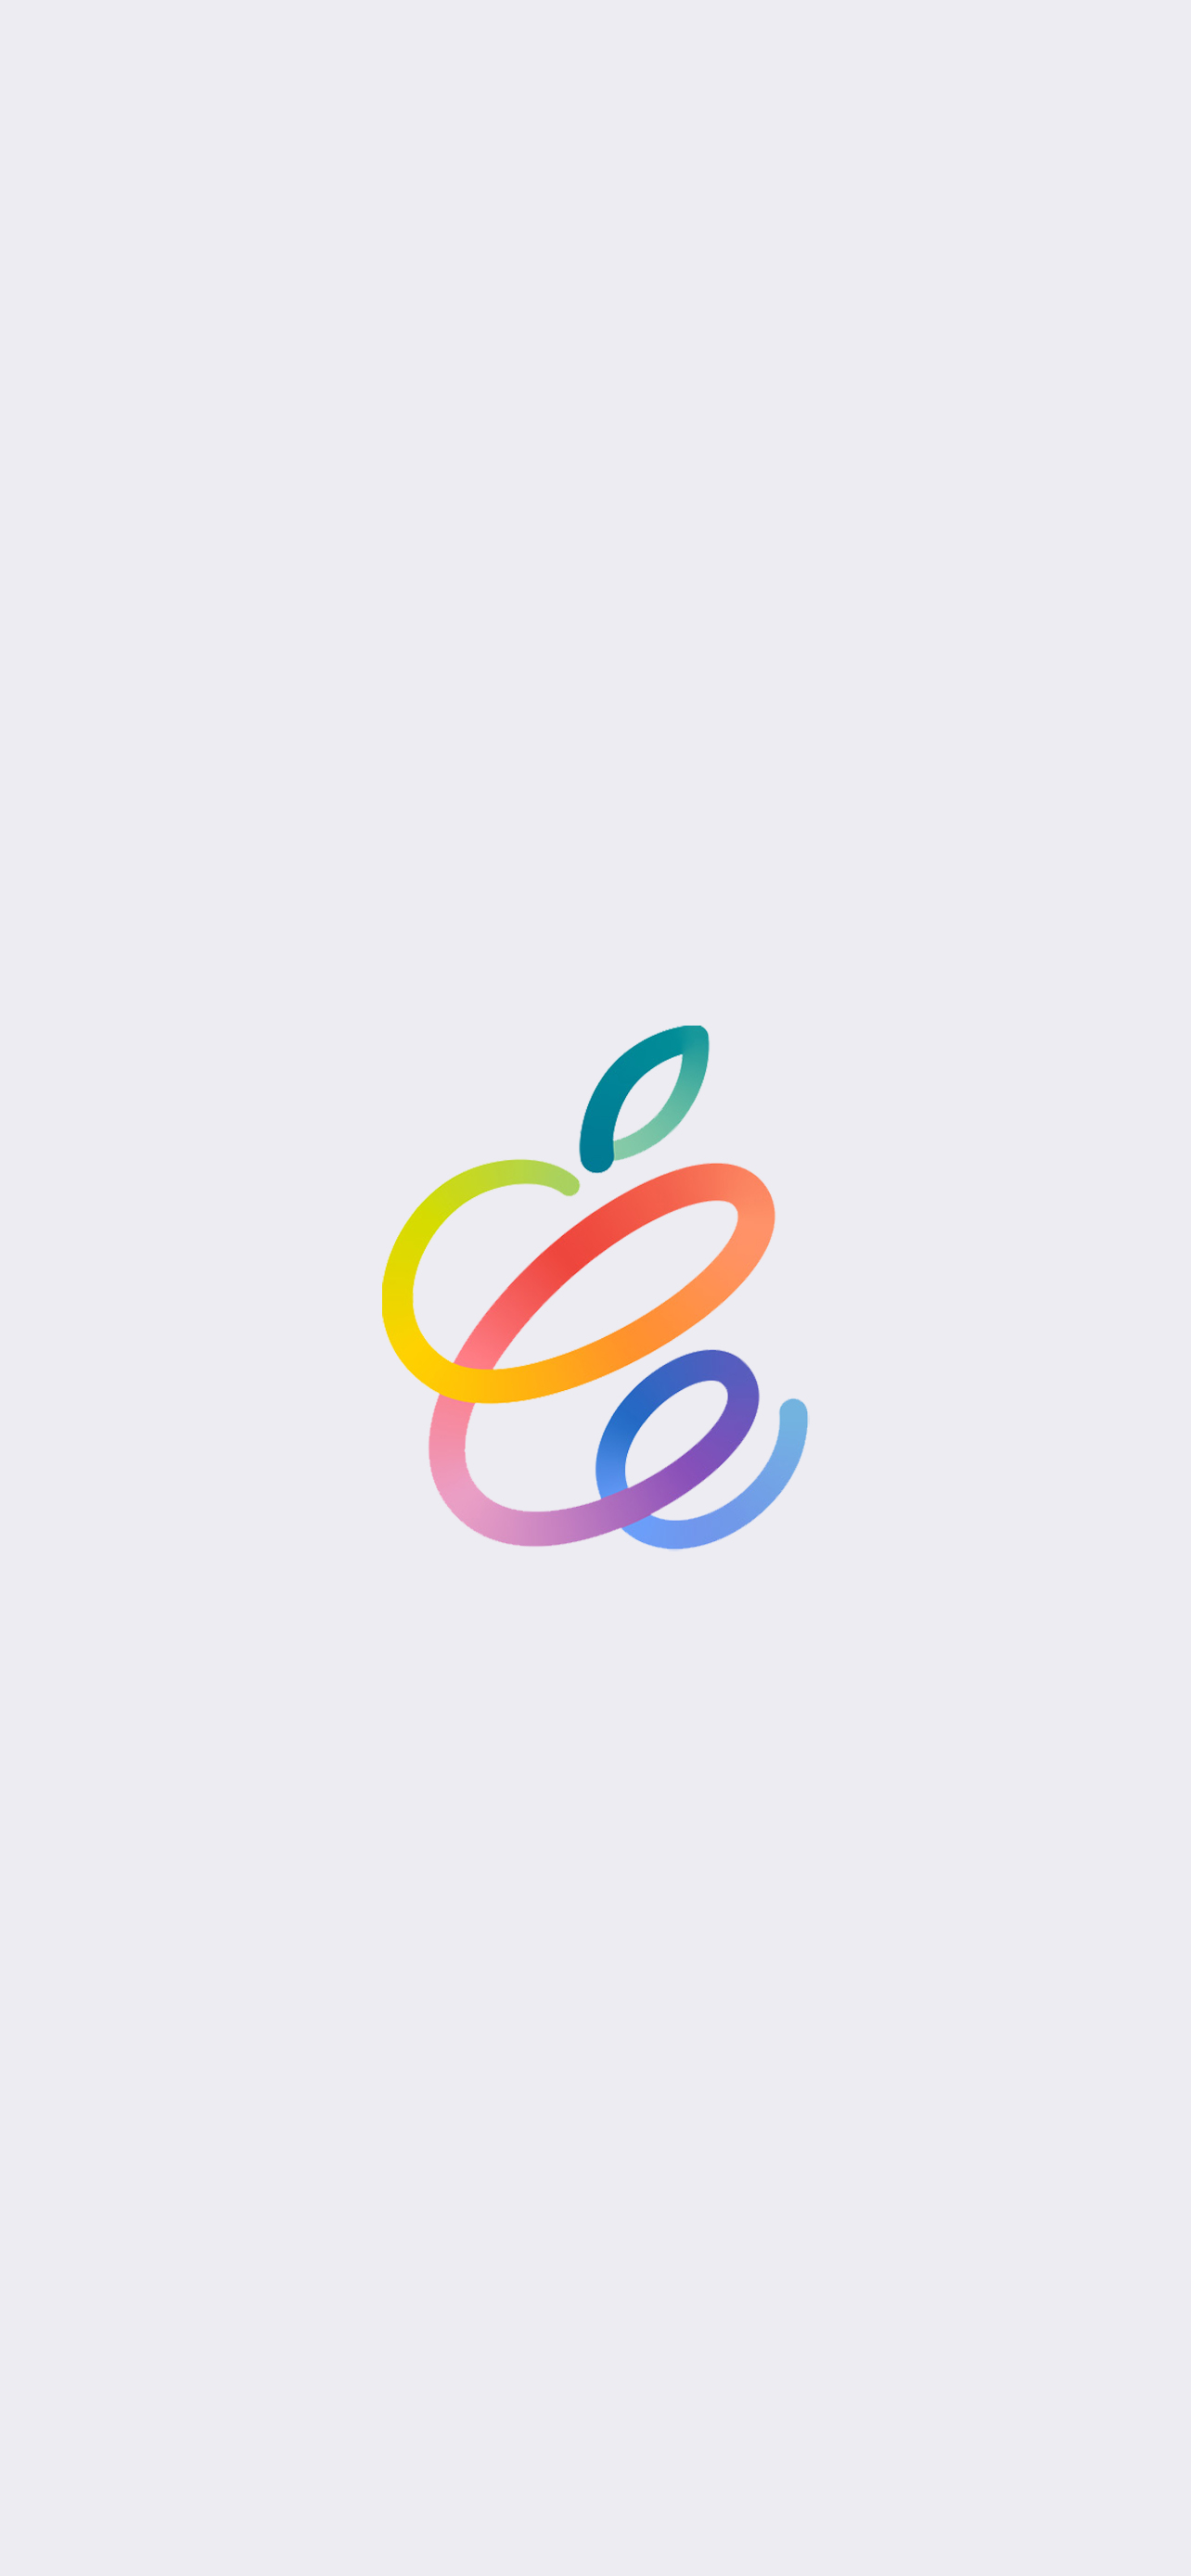 Apple Spring Loaded event wallpaper for iPhone, iPad, and Mac